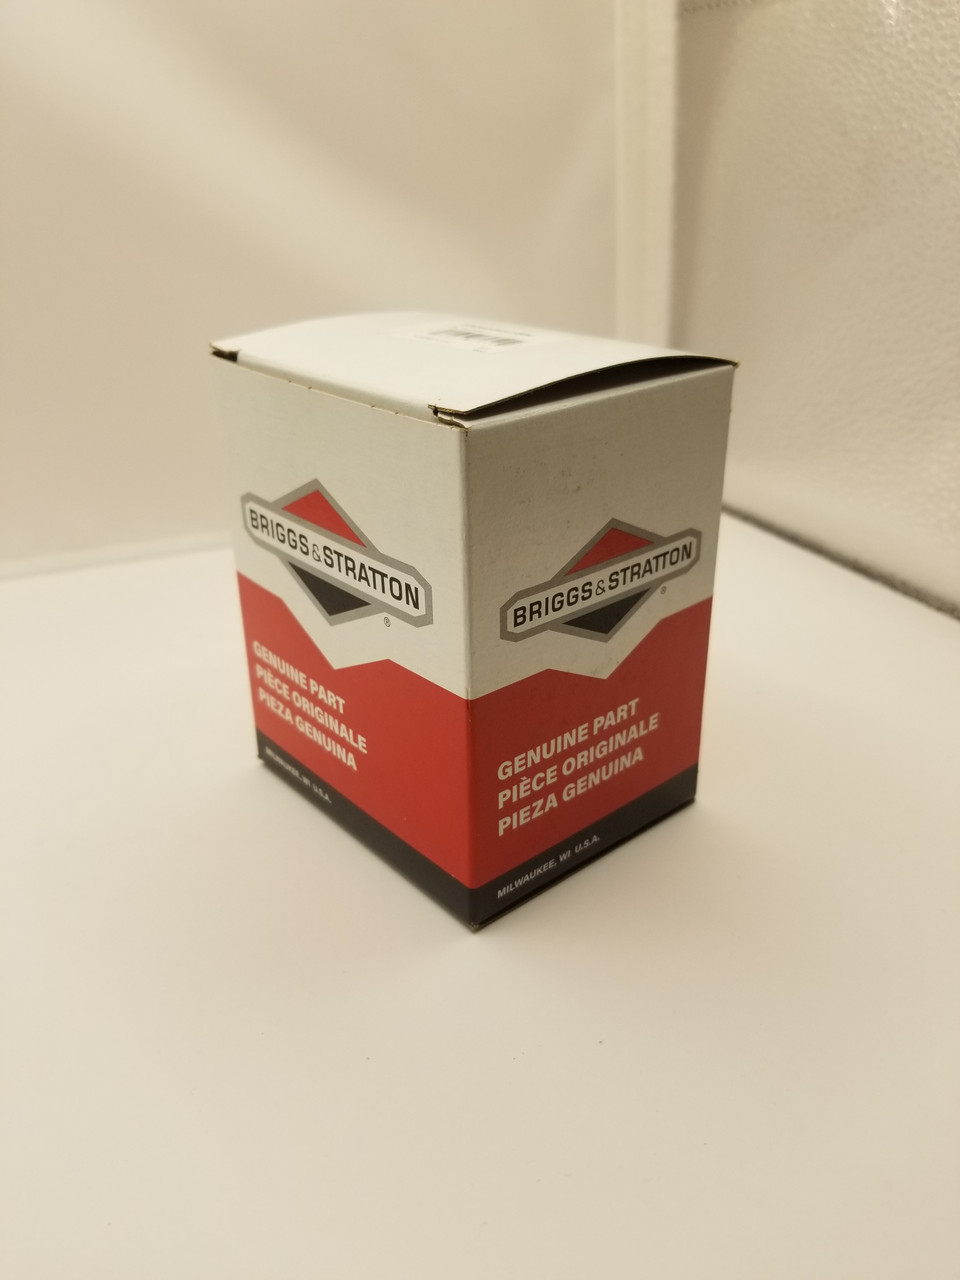 ENGINE PACKED SINGLE CARTON - 49R977-0008-G1 package std